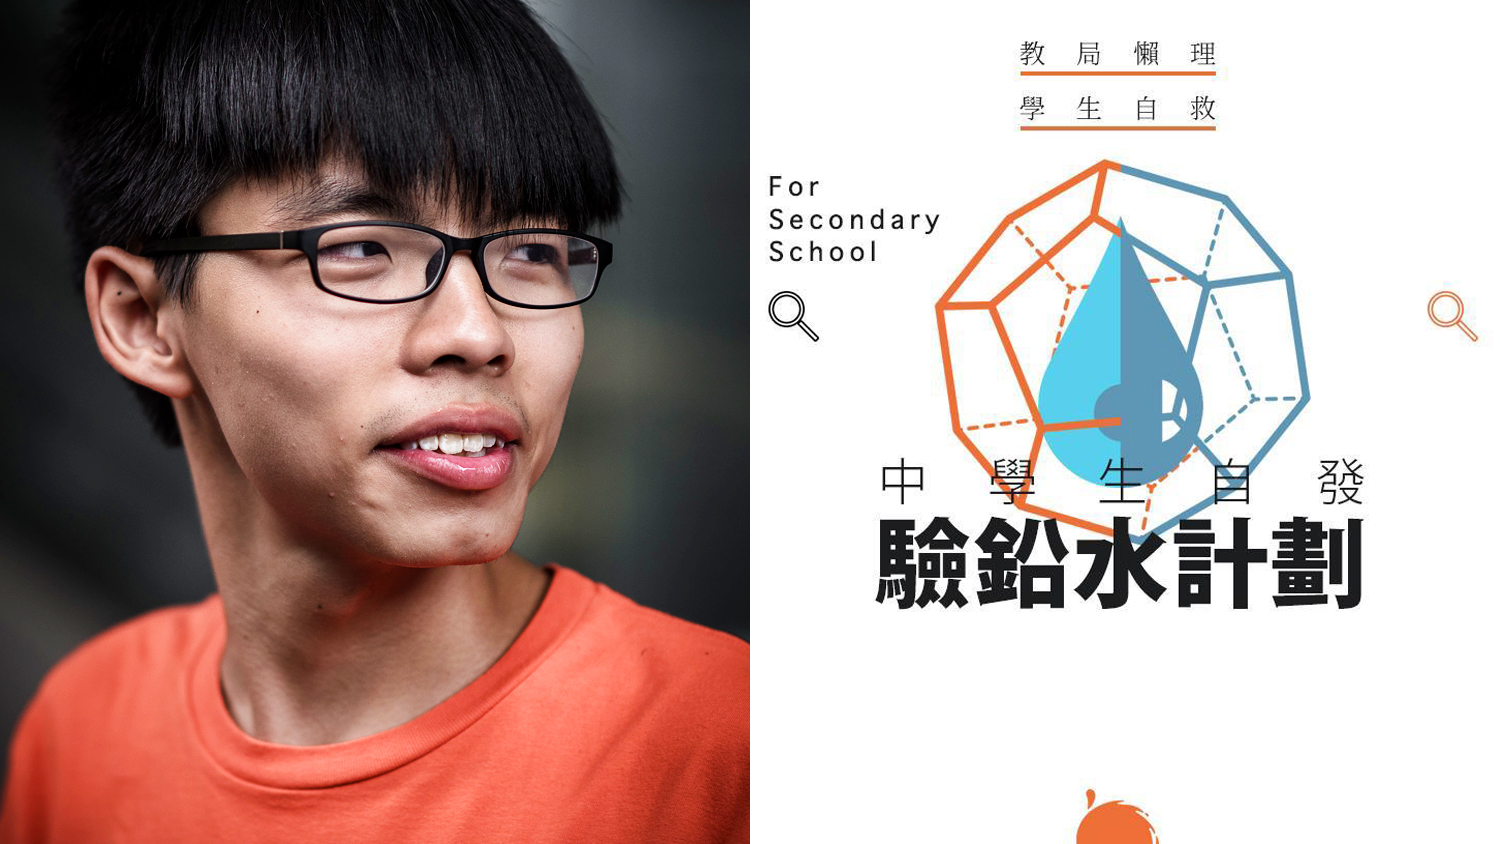 Joshua Wong Chi-fung said the exercise was estimated to cost HK$20,000 to HK$30,000 